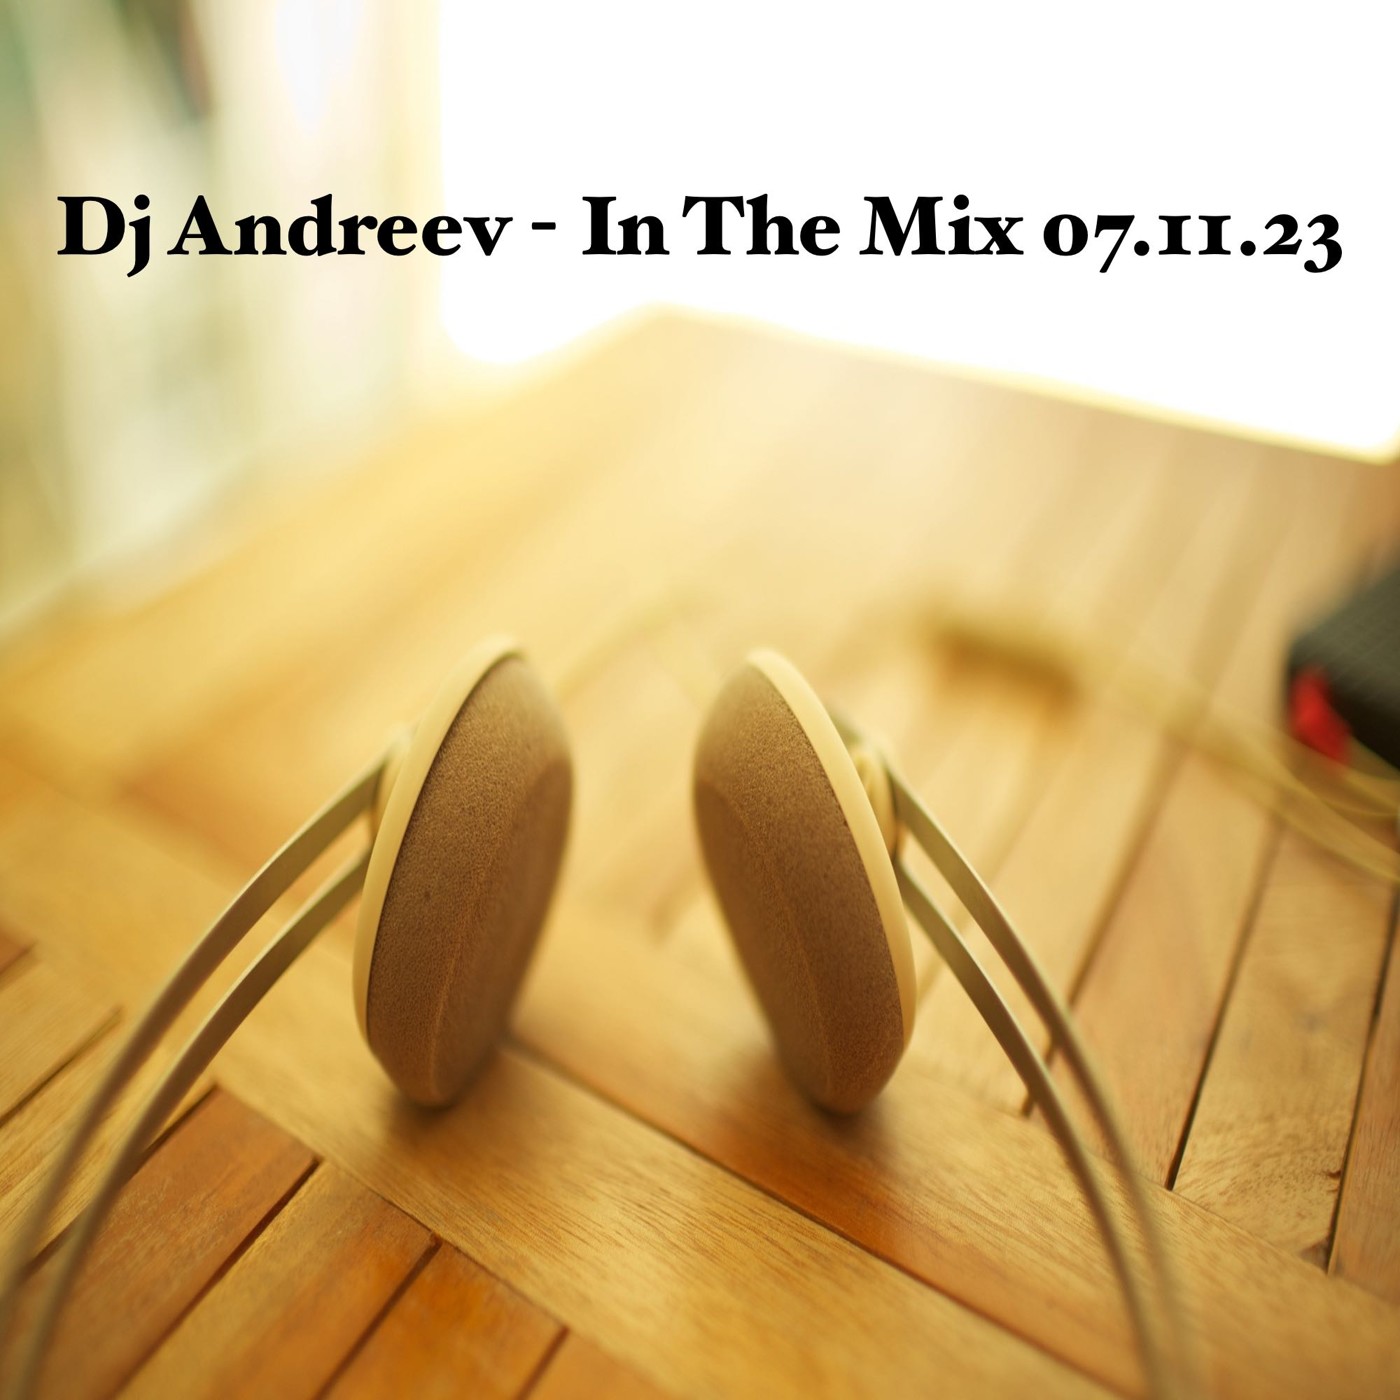 Dj Andreev - In The Mix 07.11.23